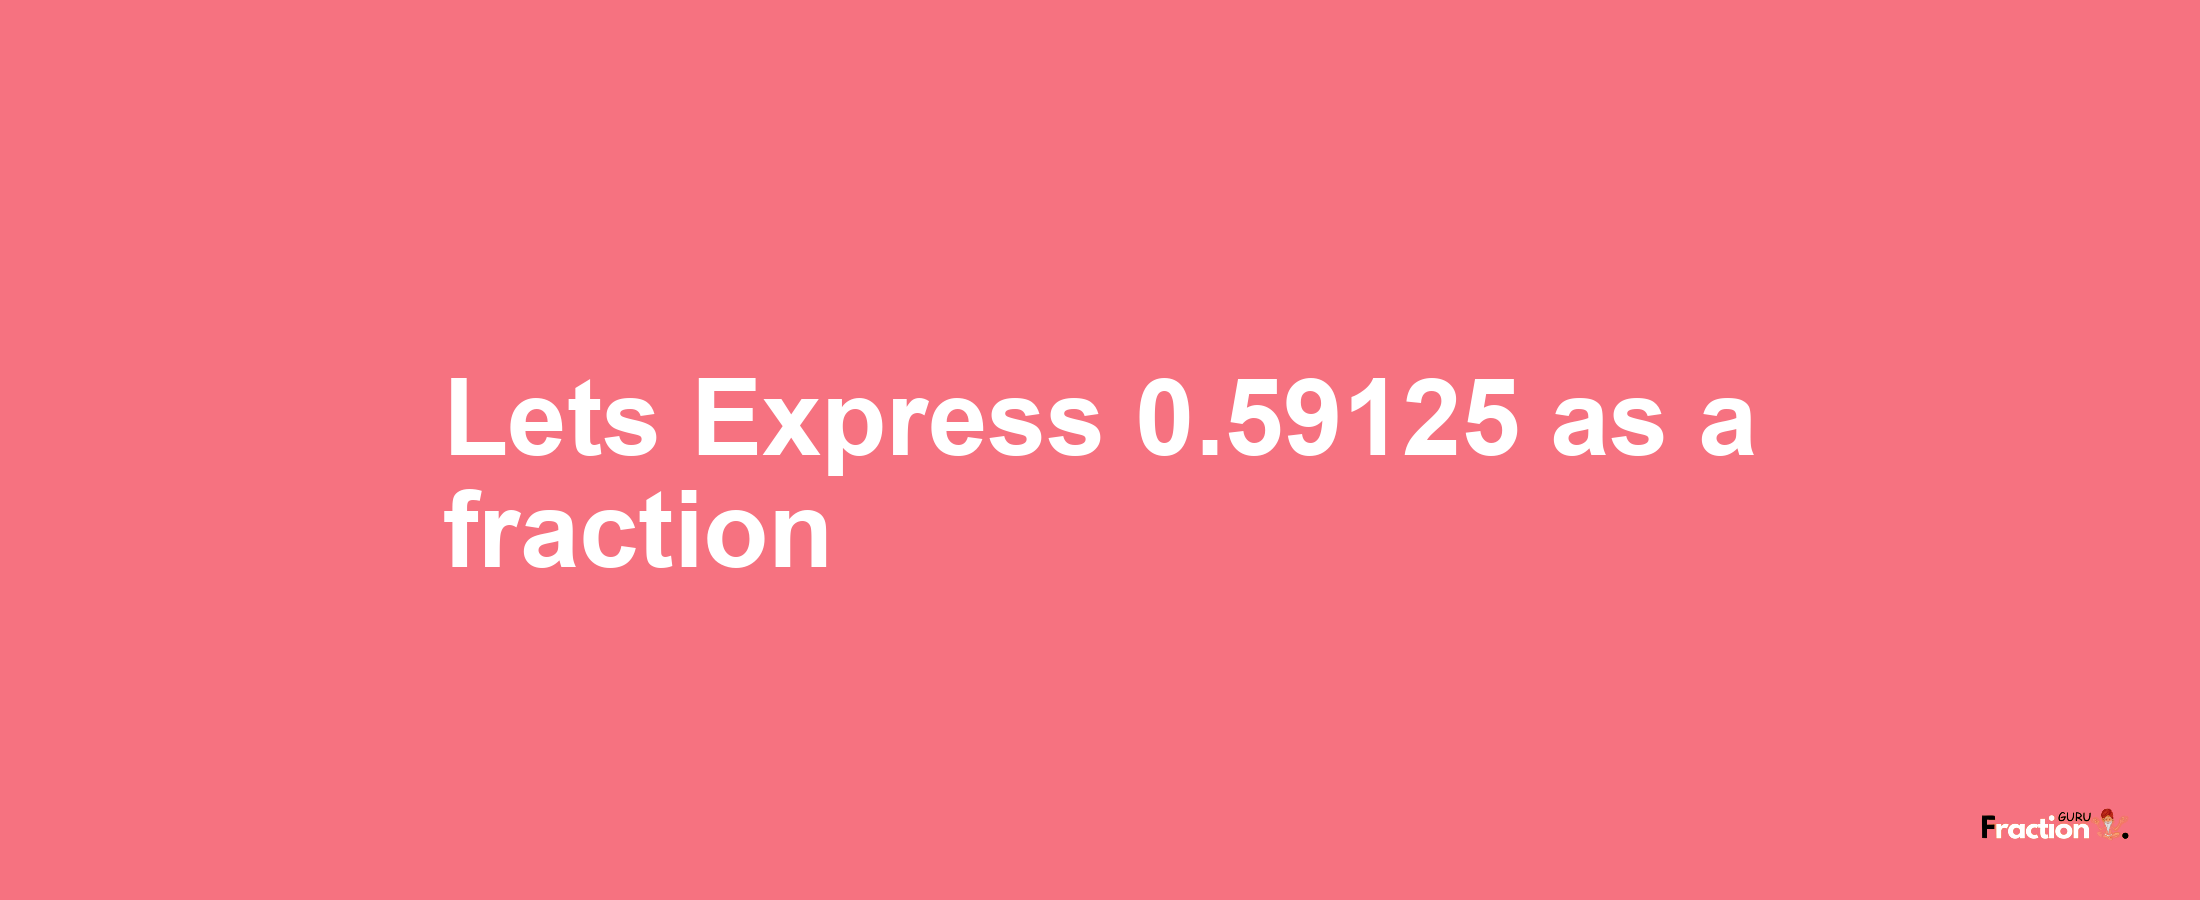 Lets Express 0.59125 as afraction